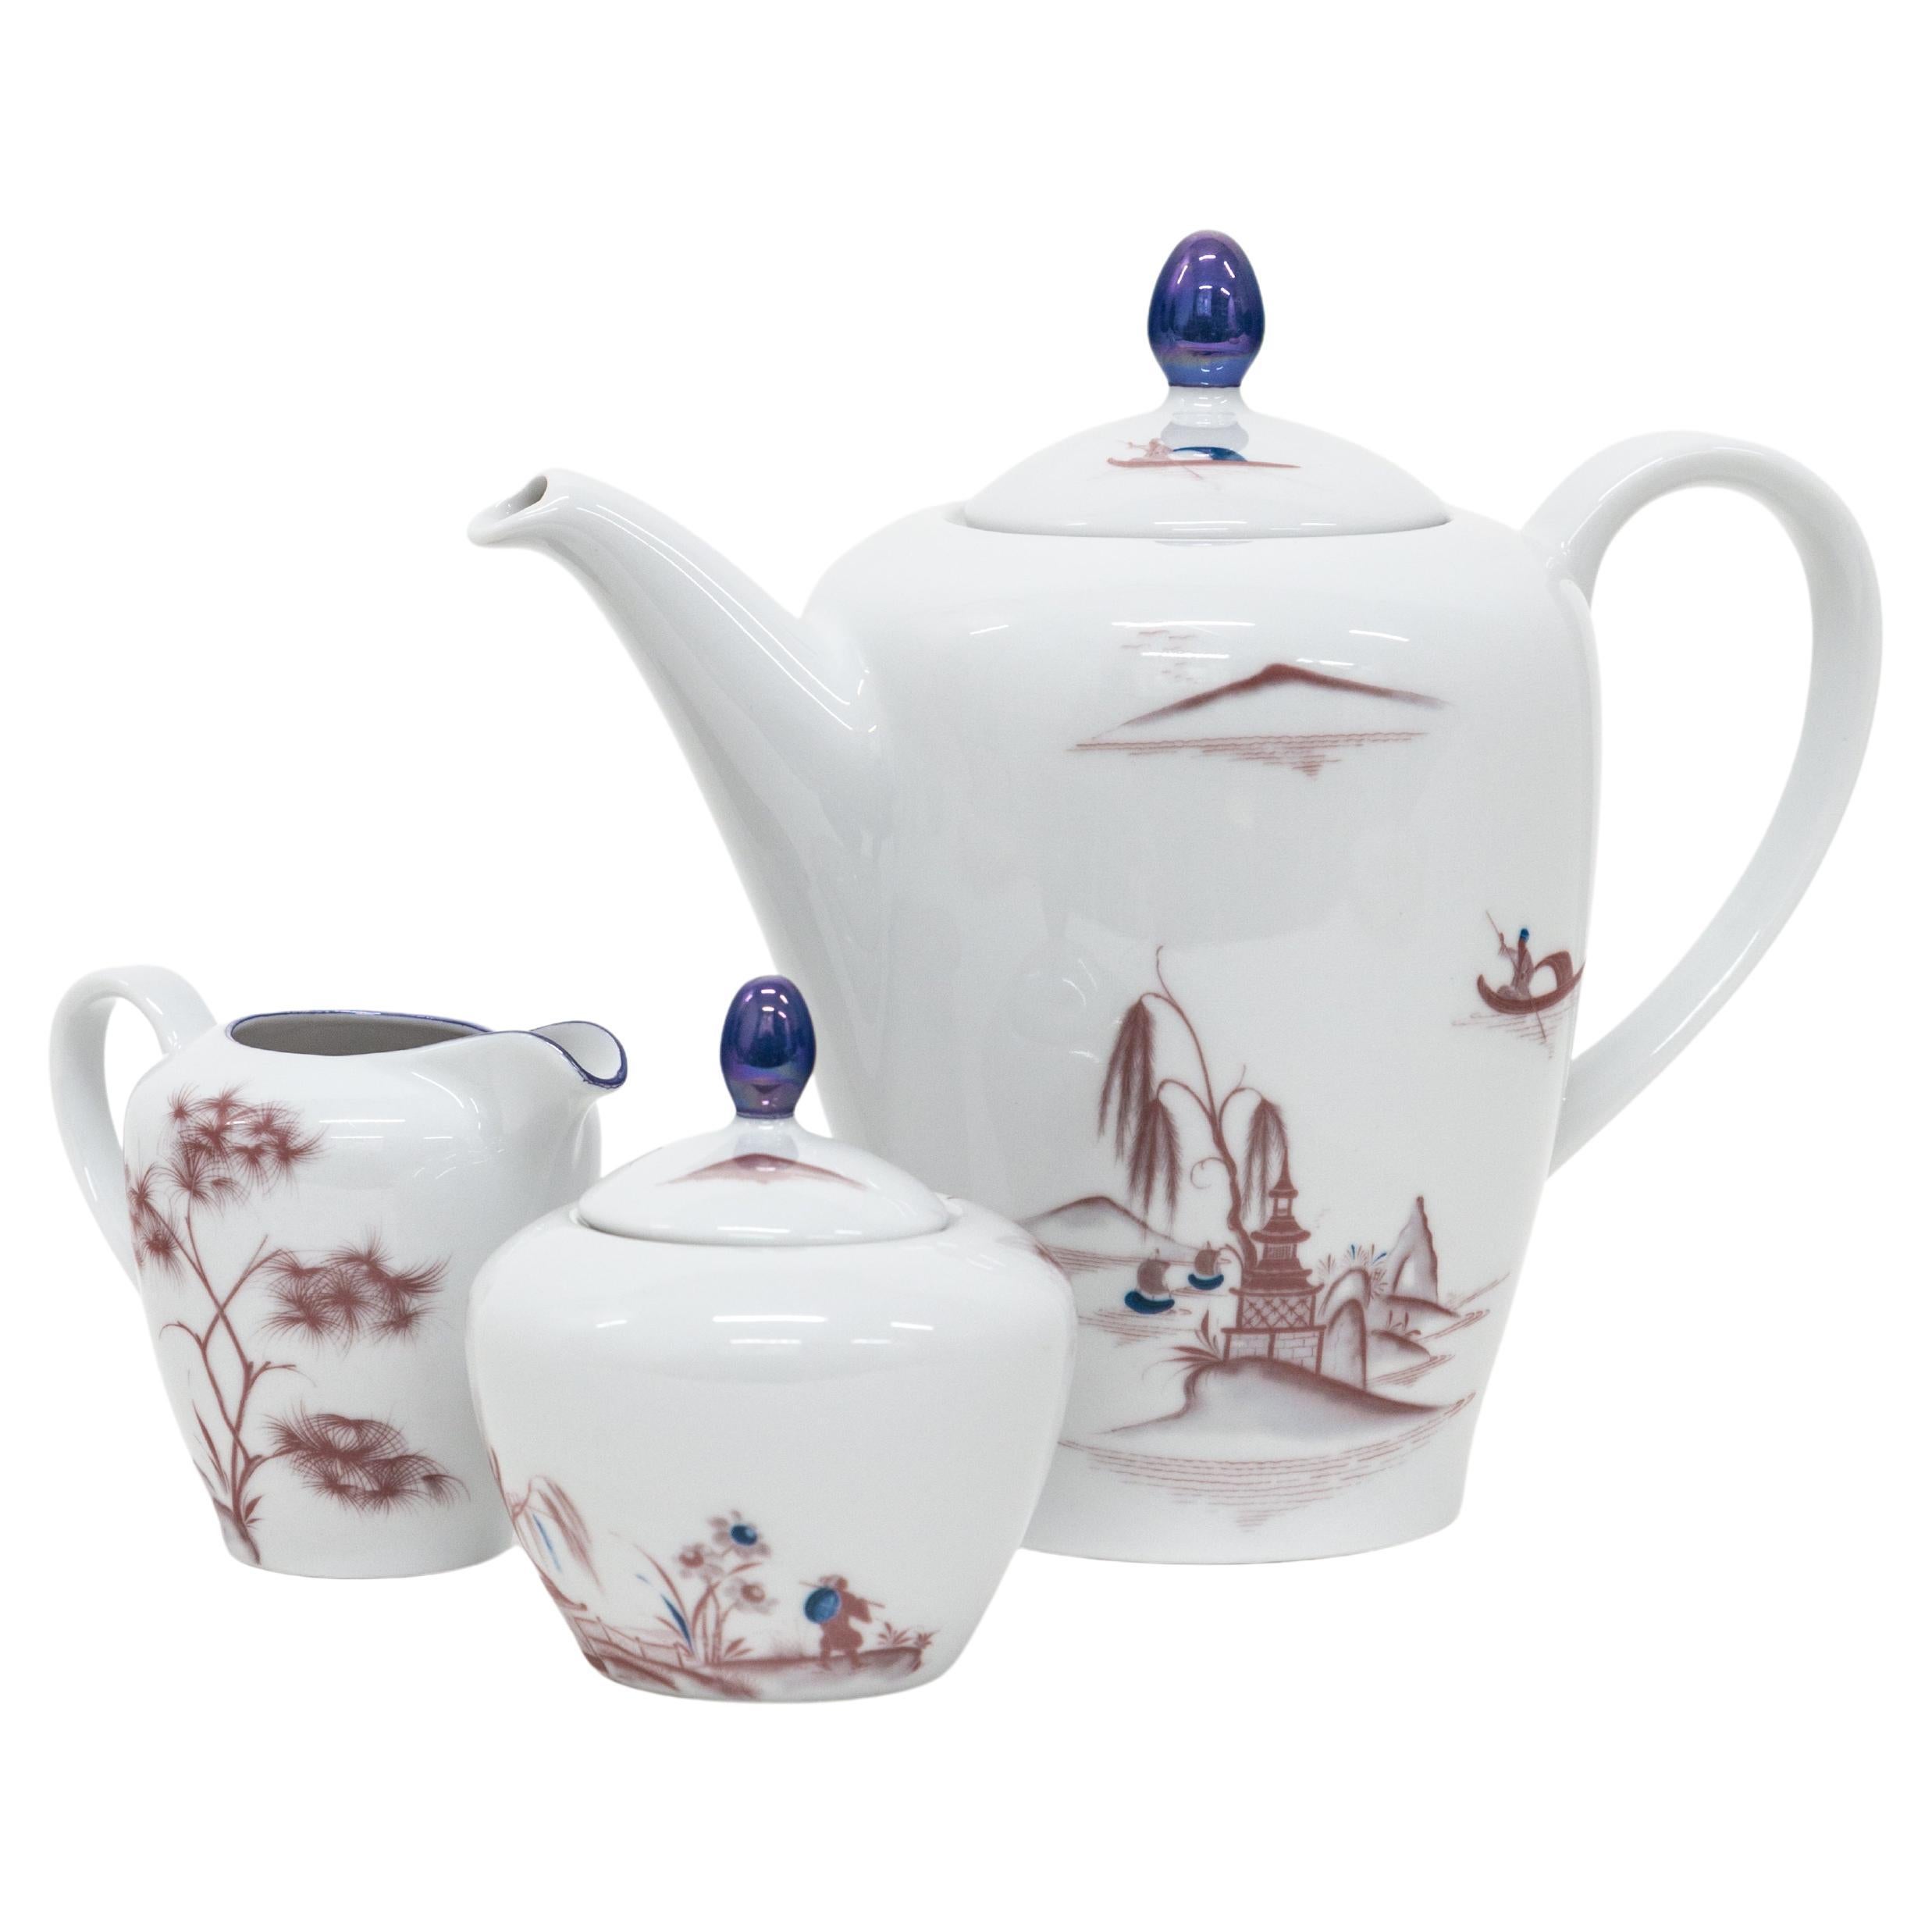 Natsumi, Contemporary Decorated Porcelain Tea Time Set by Vito Nesta For Sale